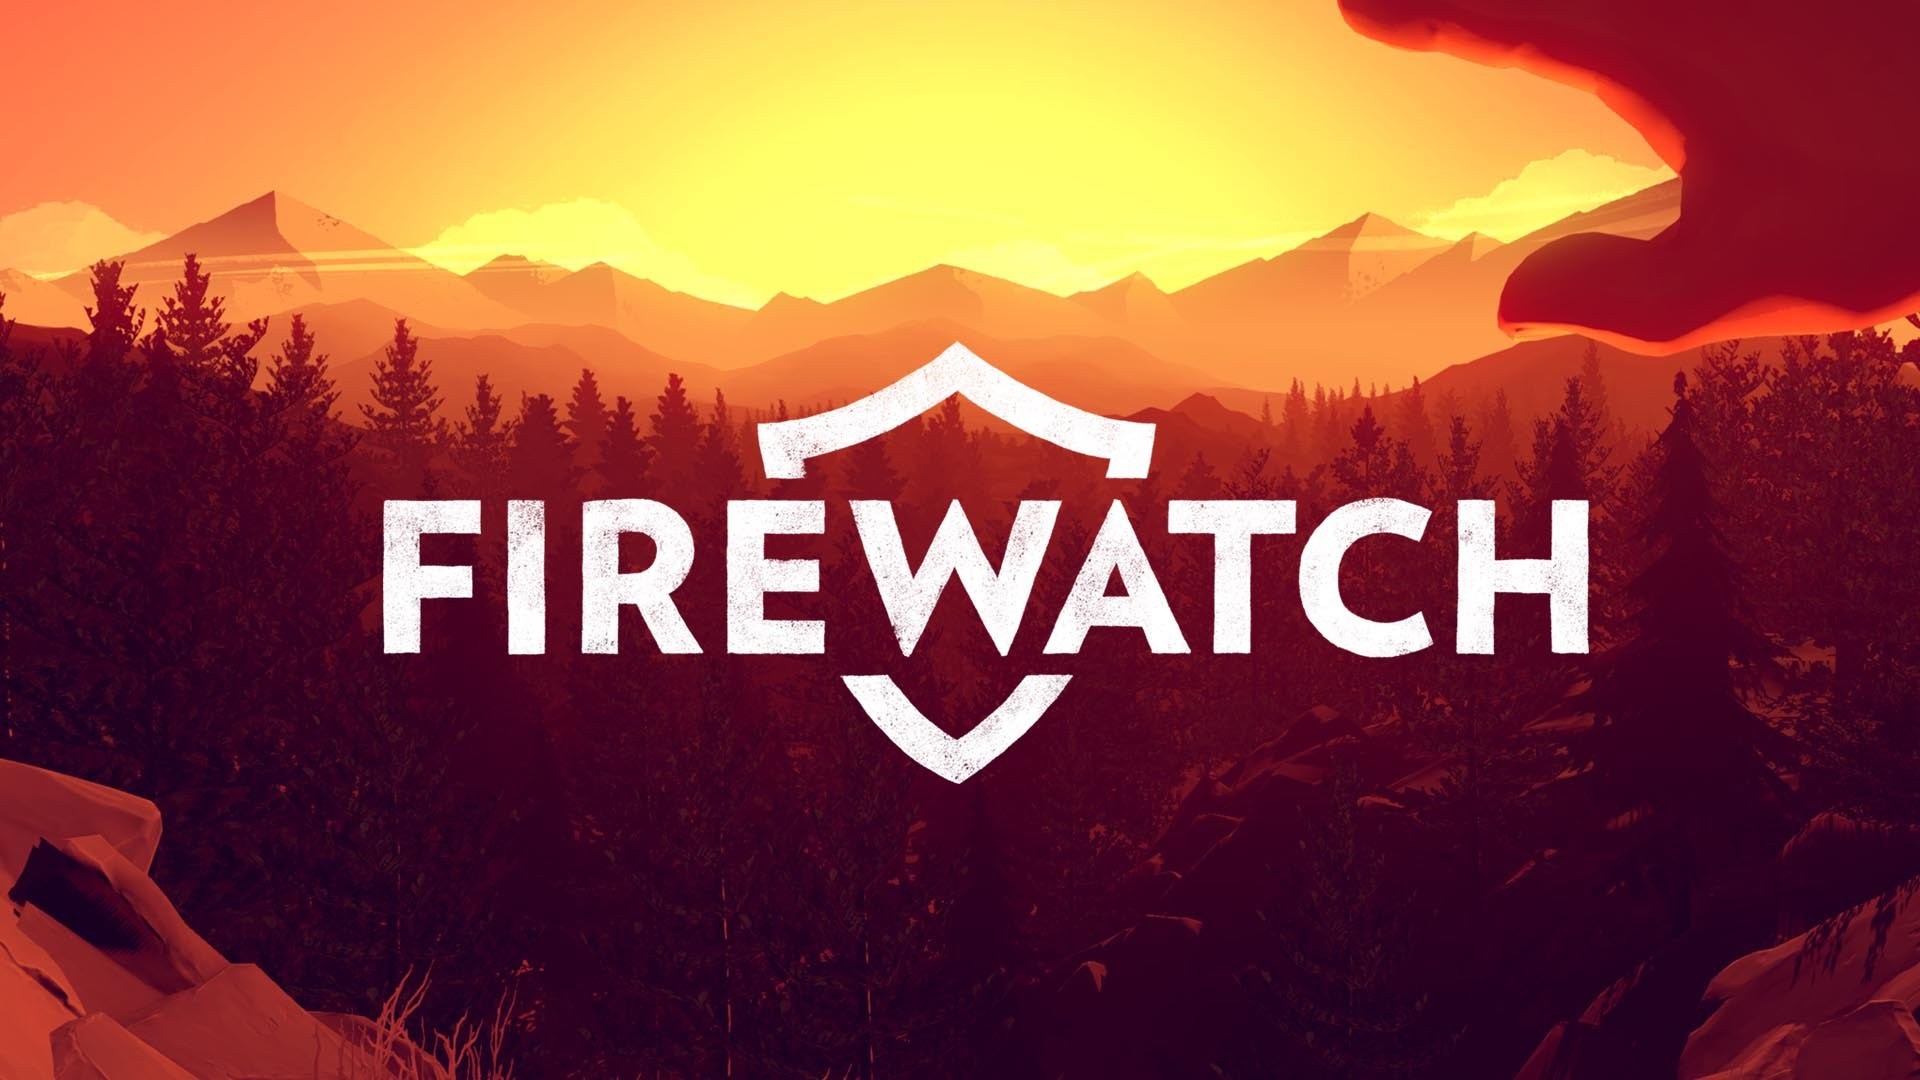 General 1920x1080 Firewatch video games video game art PC gaming video game landscape